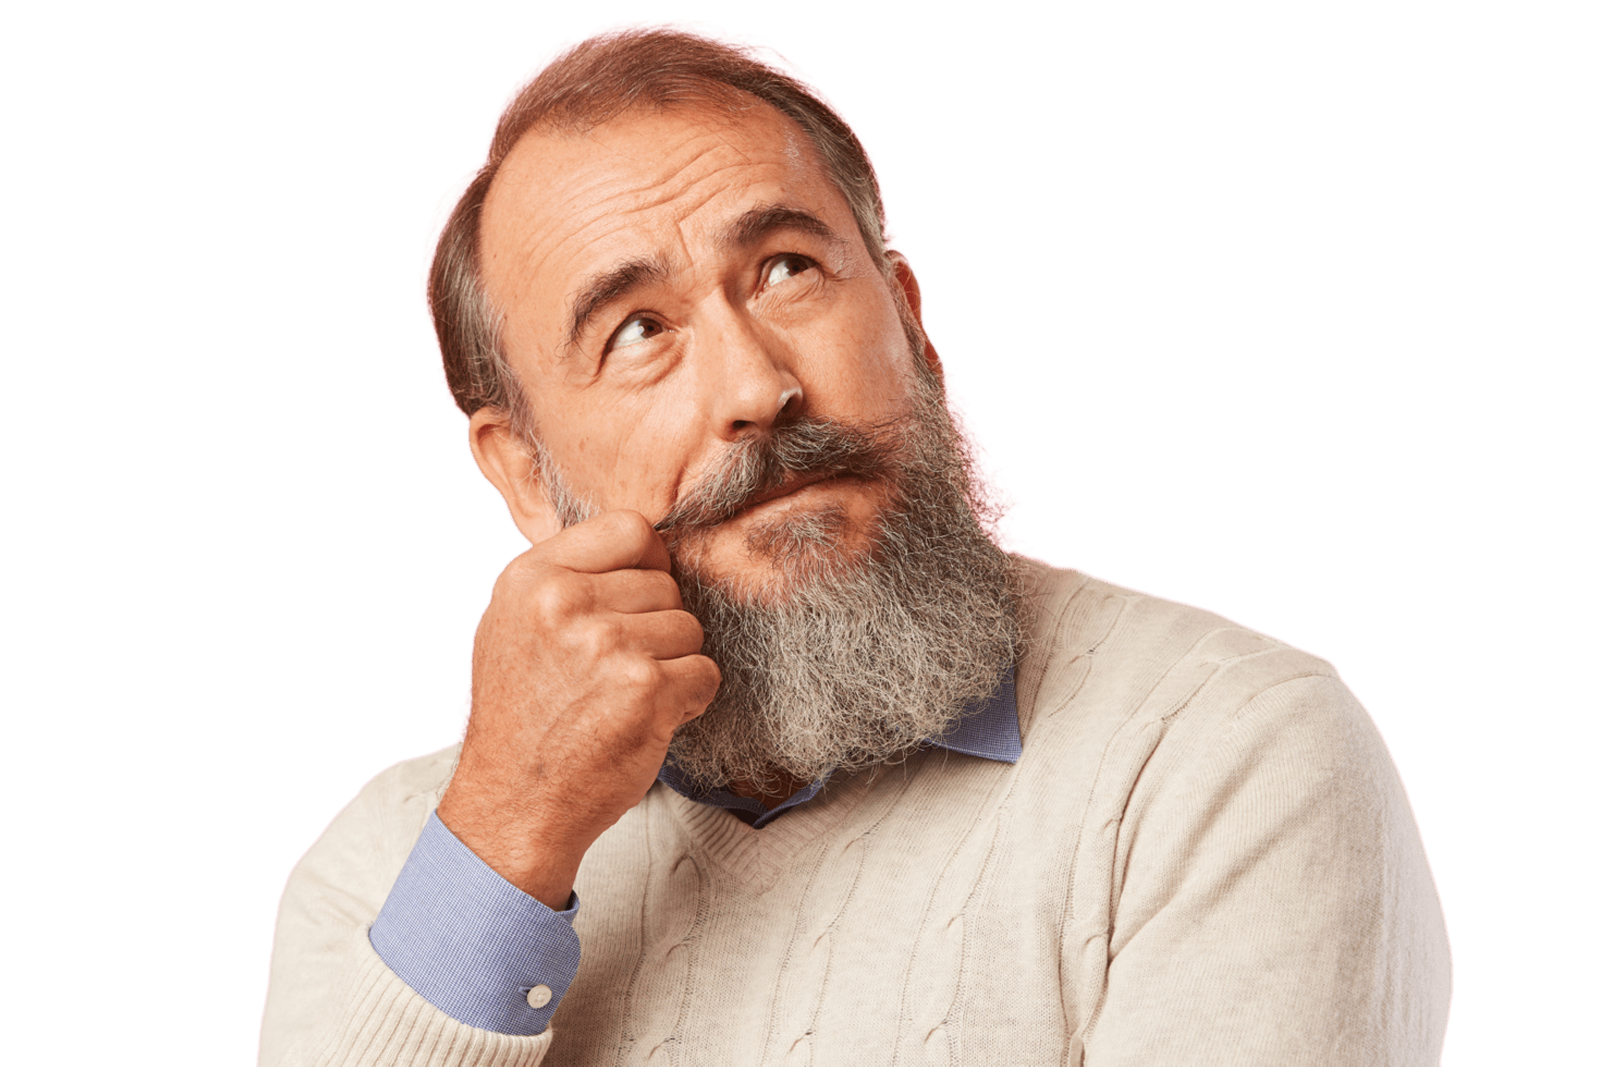 Older man thinking with his hand on his chin